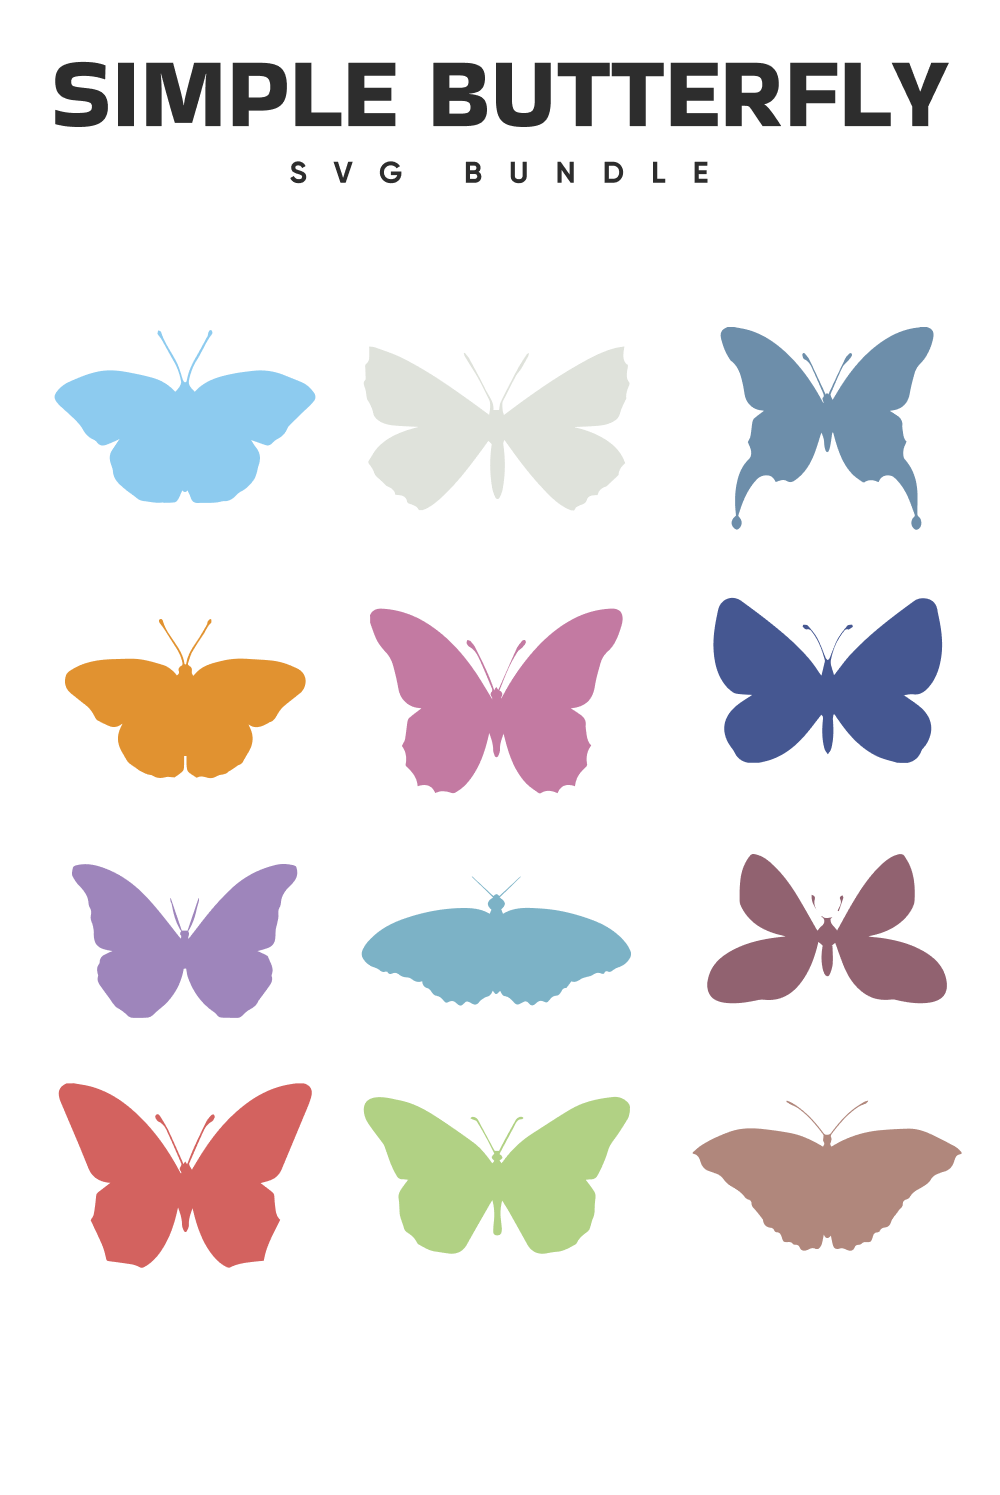 Poster with a bunch of butterflies on it.